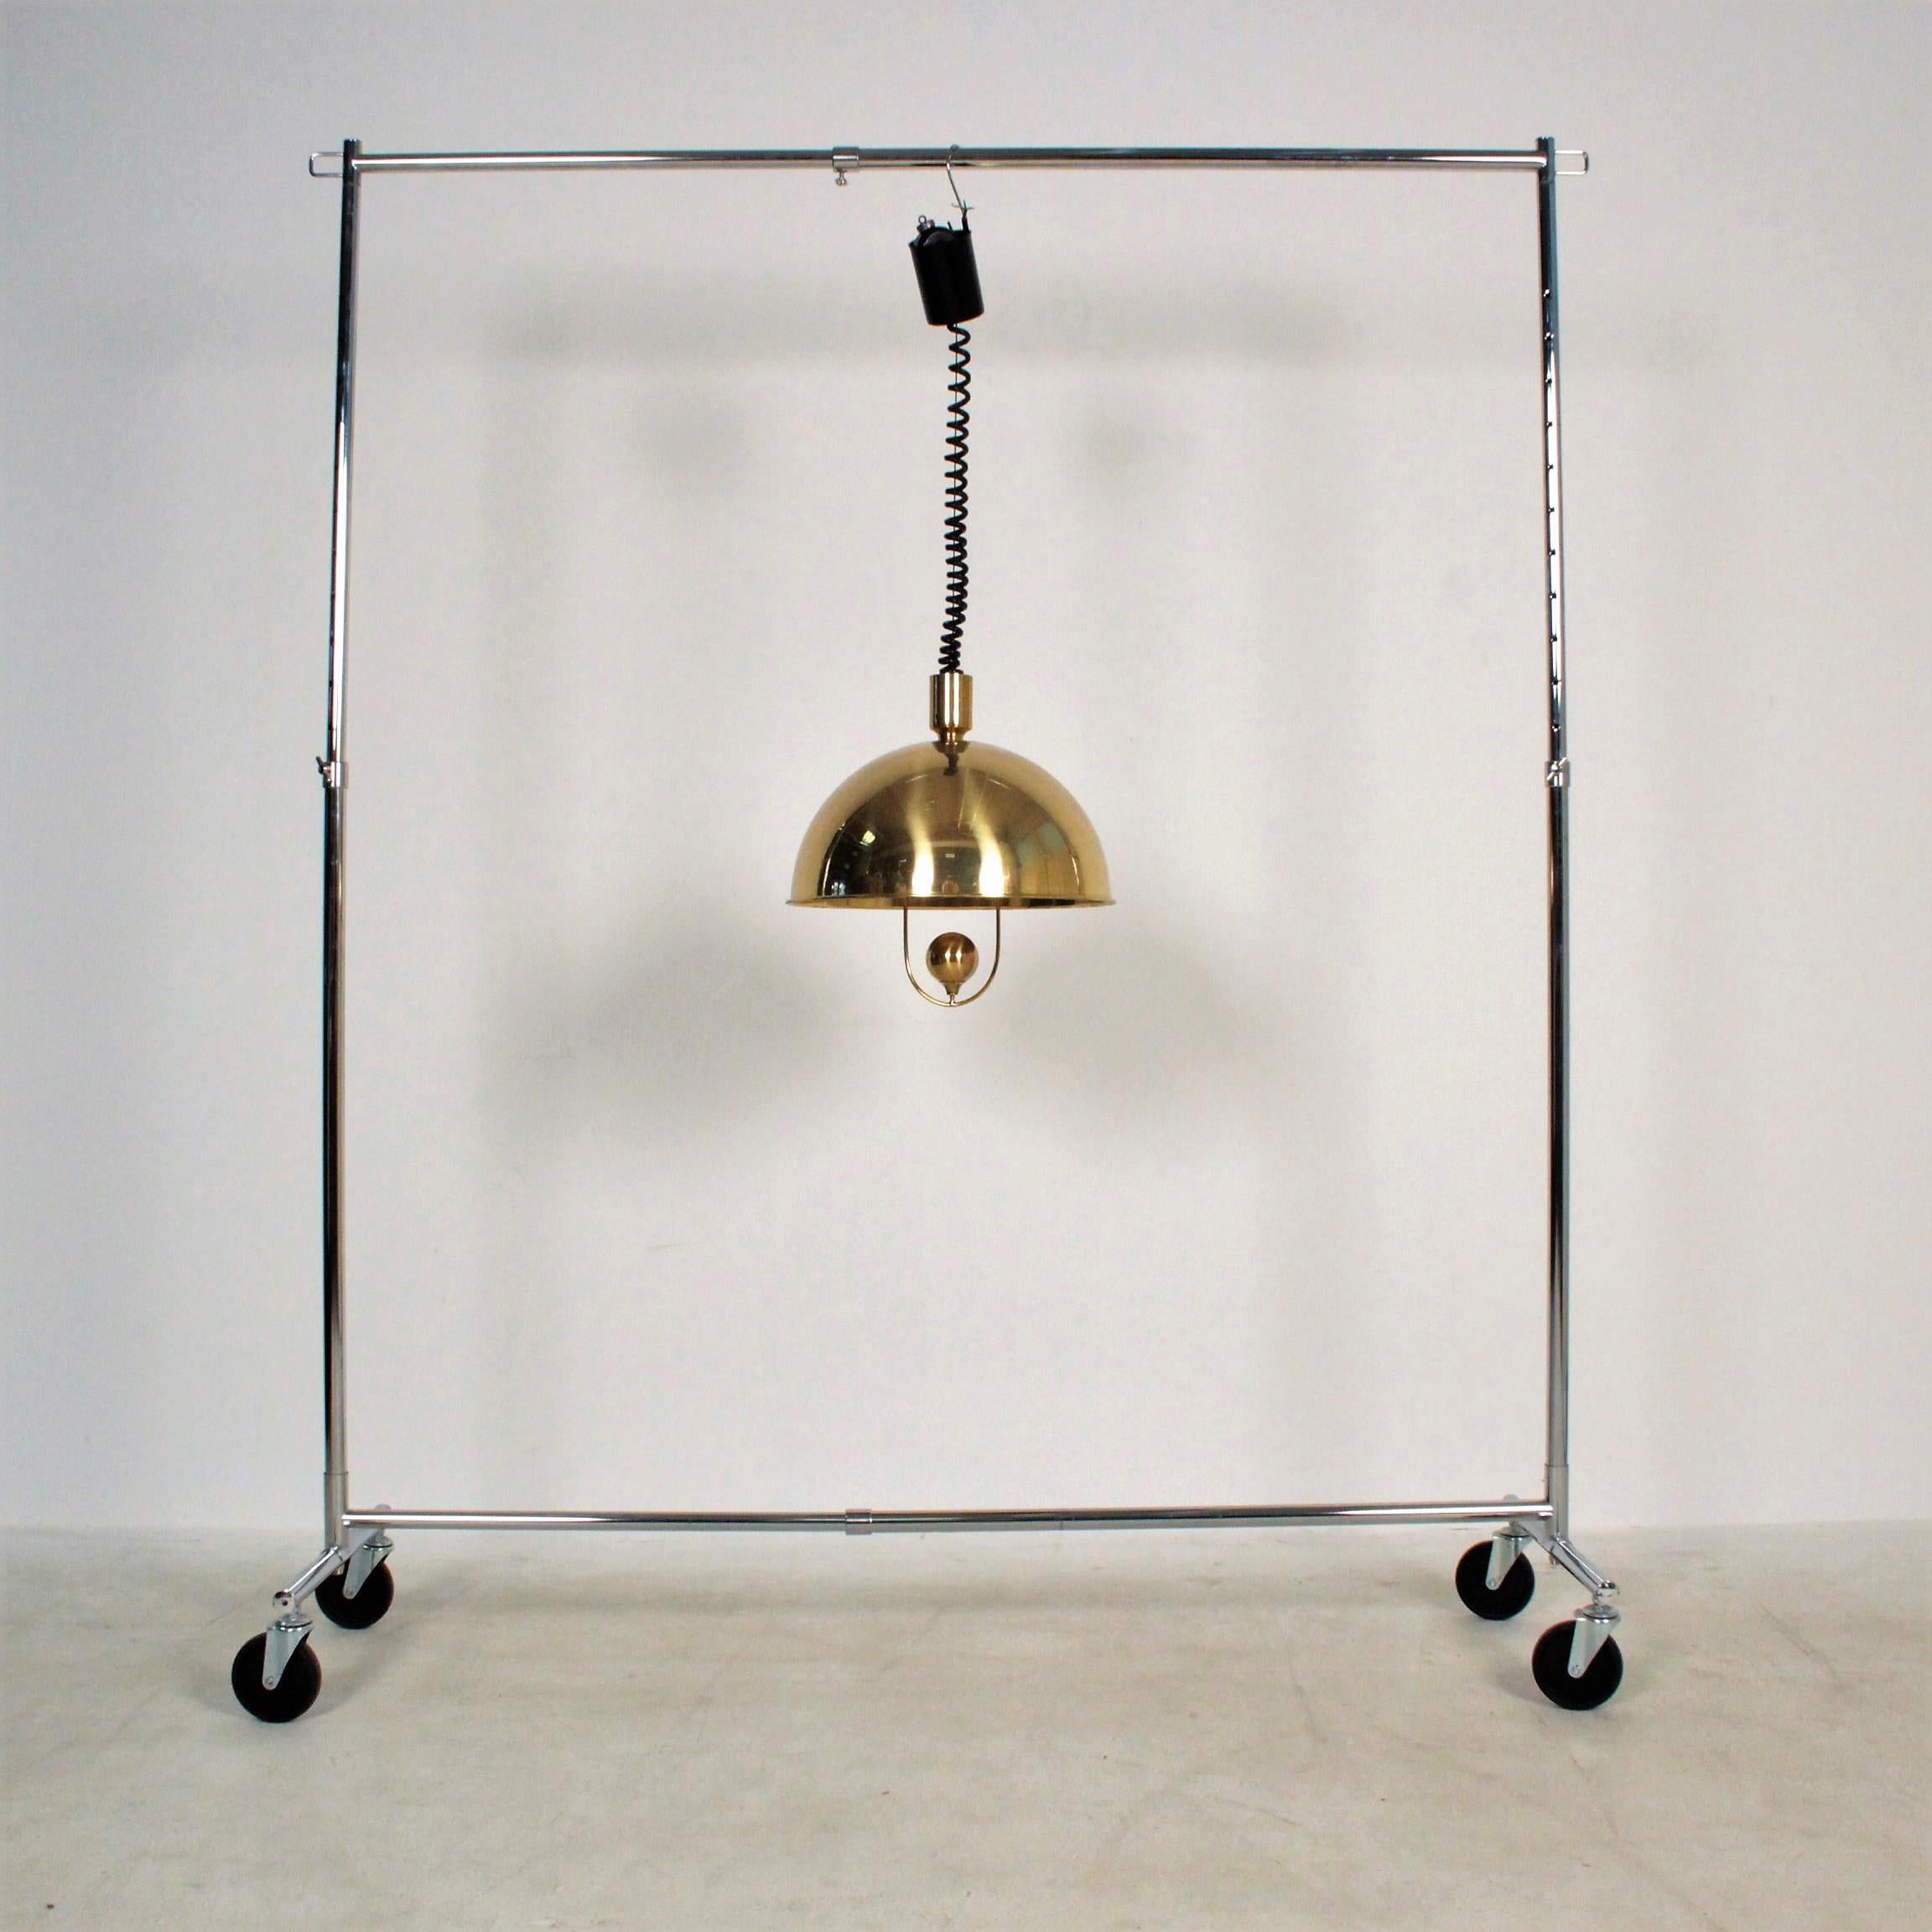 Florian Schulz pendant Brass with weight light, Germany, 1970
Model with a round weight as a deflector for the light
Good condition, some light scratches oil the surface 
This item can be rewired to the specification of your country on request.